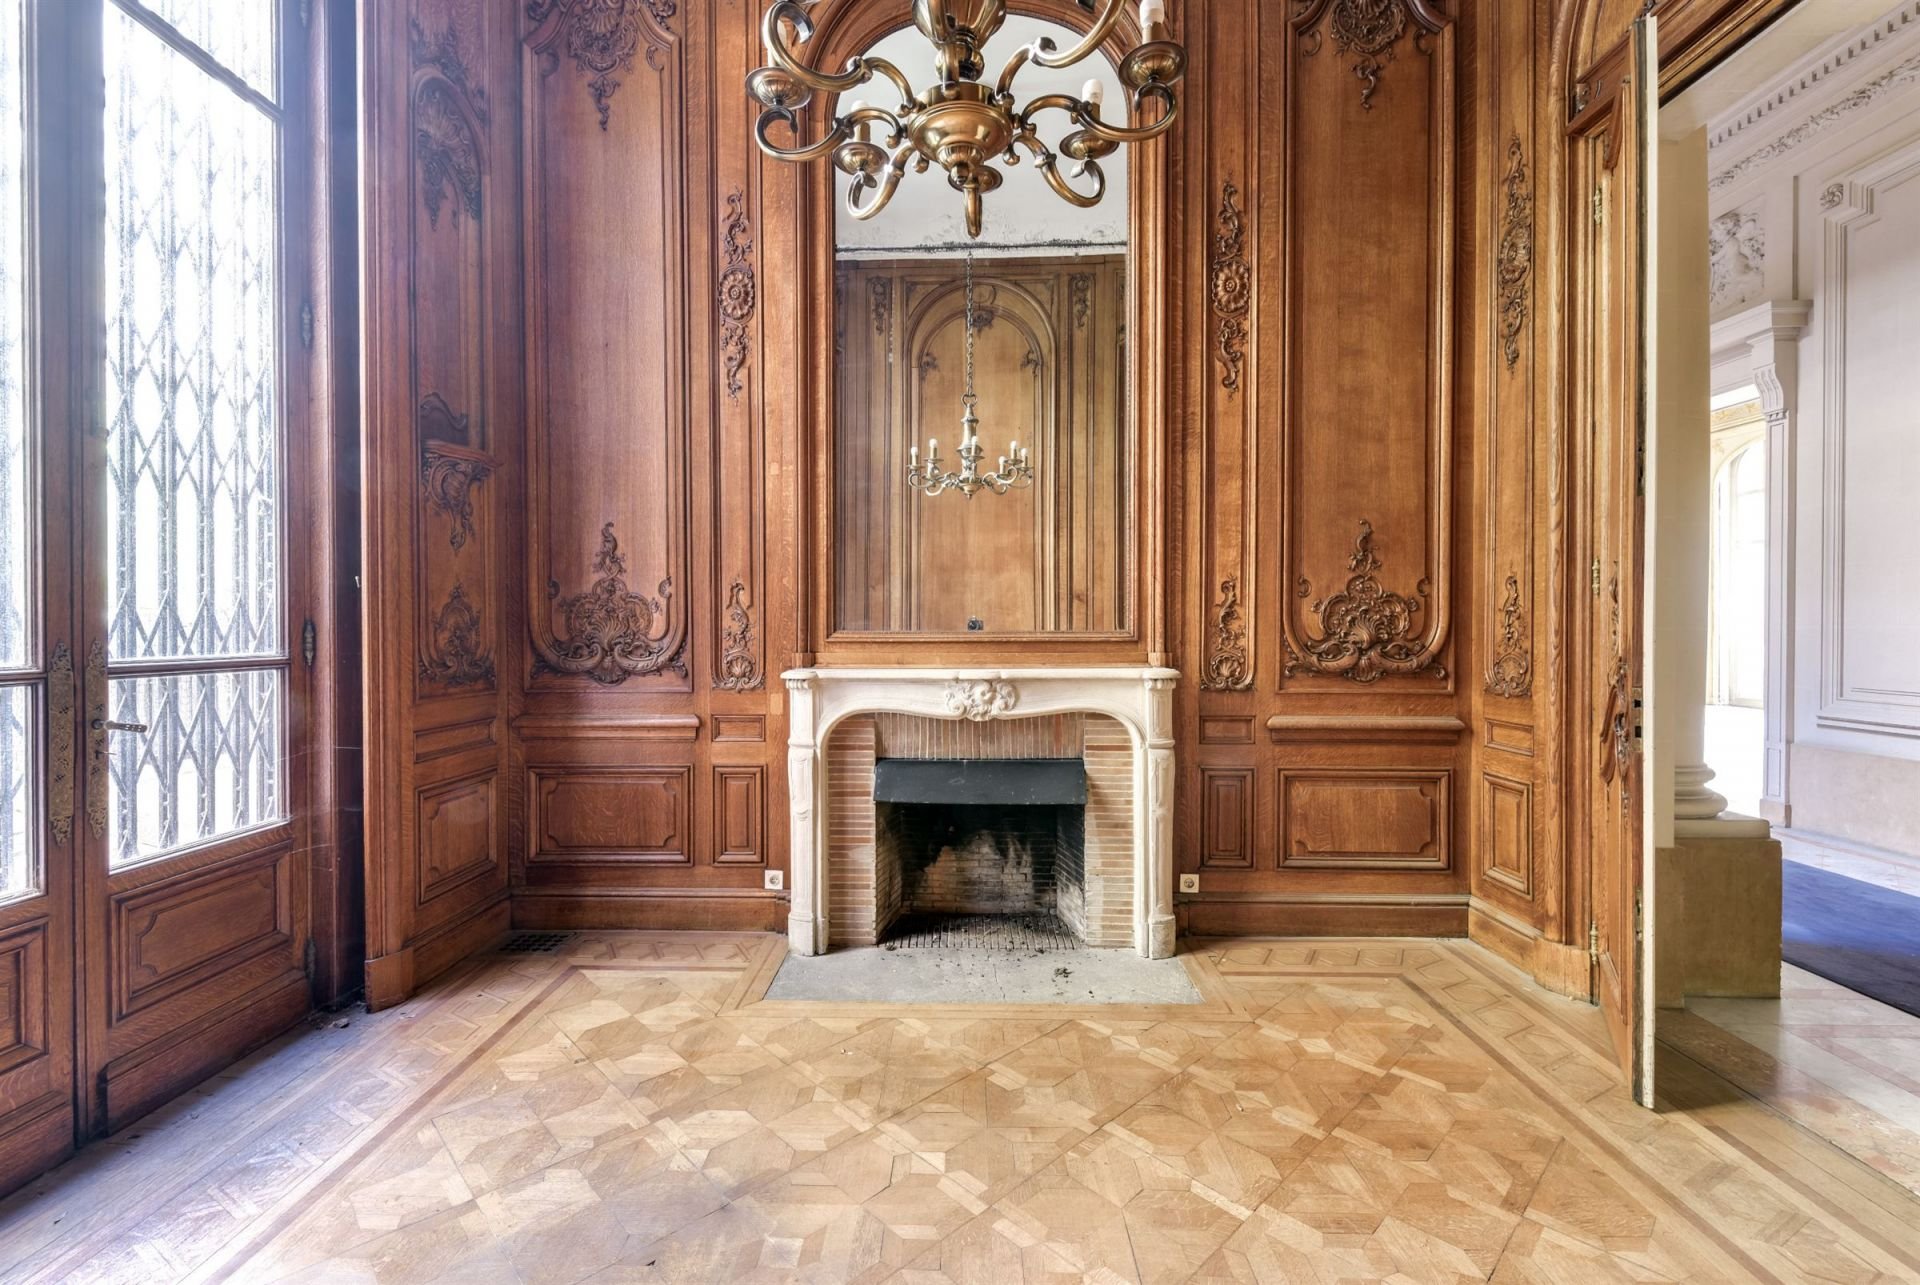 Francis York Outstanding Private Mansion in the 16th Arrondissement 14.jpg